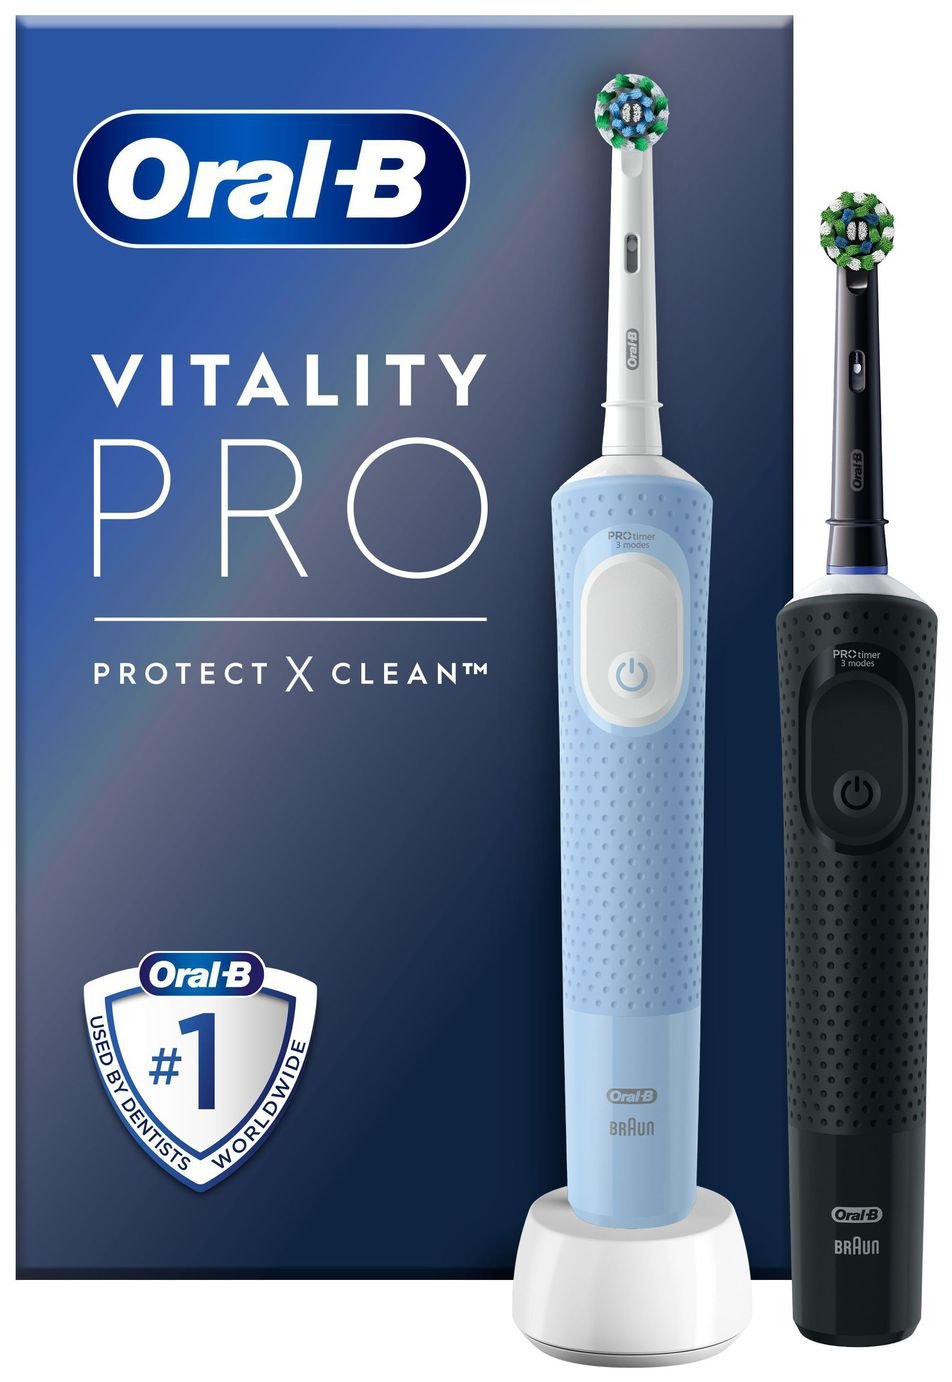 Oral-B Vitality Pro Electric Toothbrush Duo Pack Black/ Blue